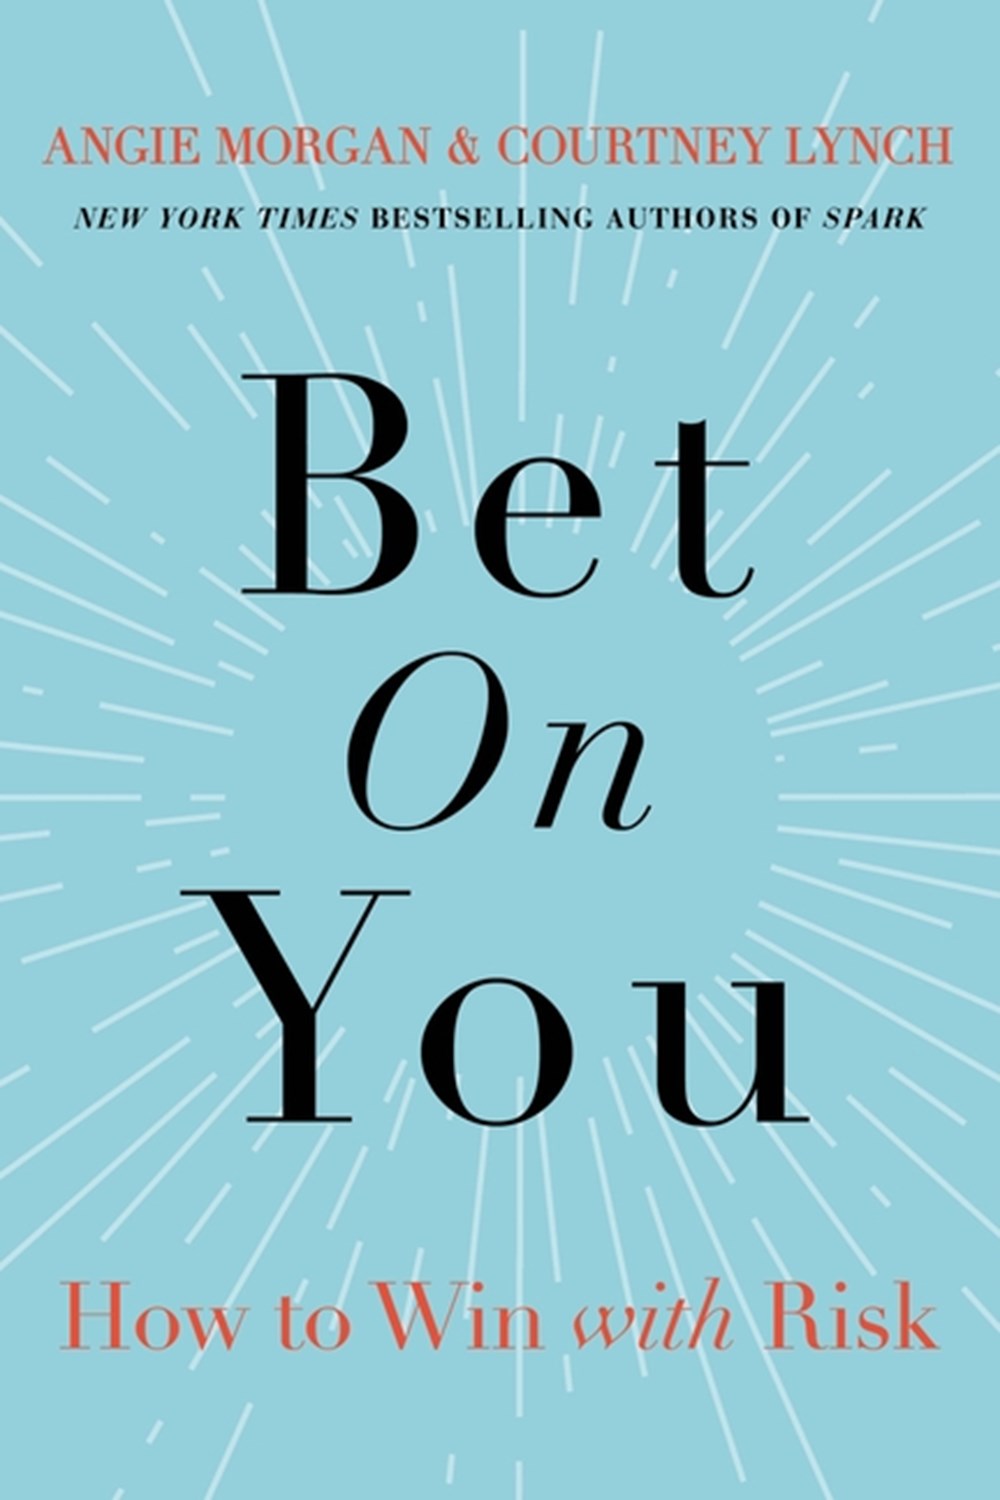 Bet on You: How to Win with Risk